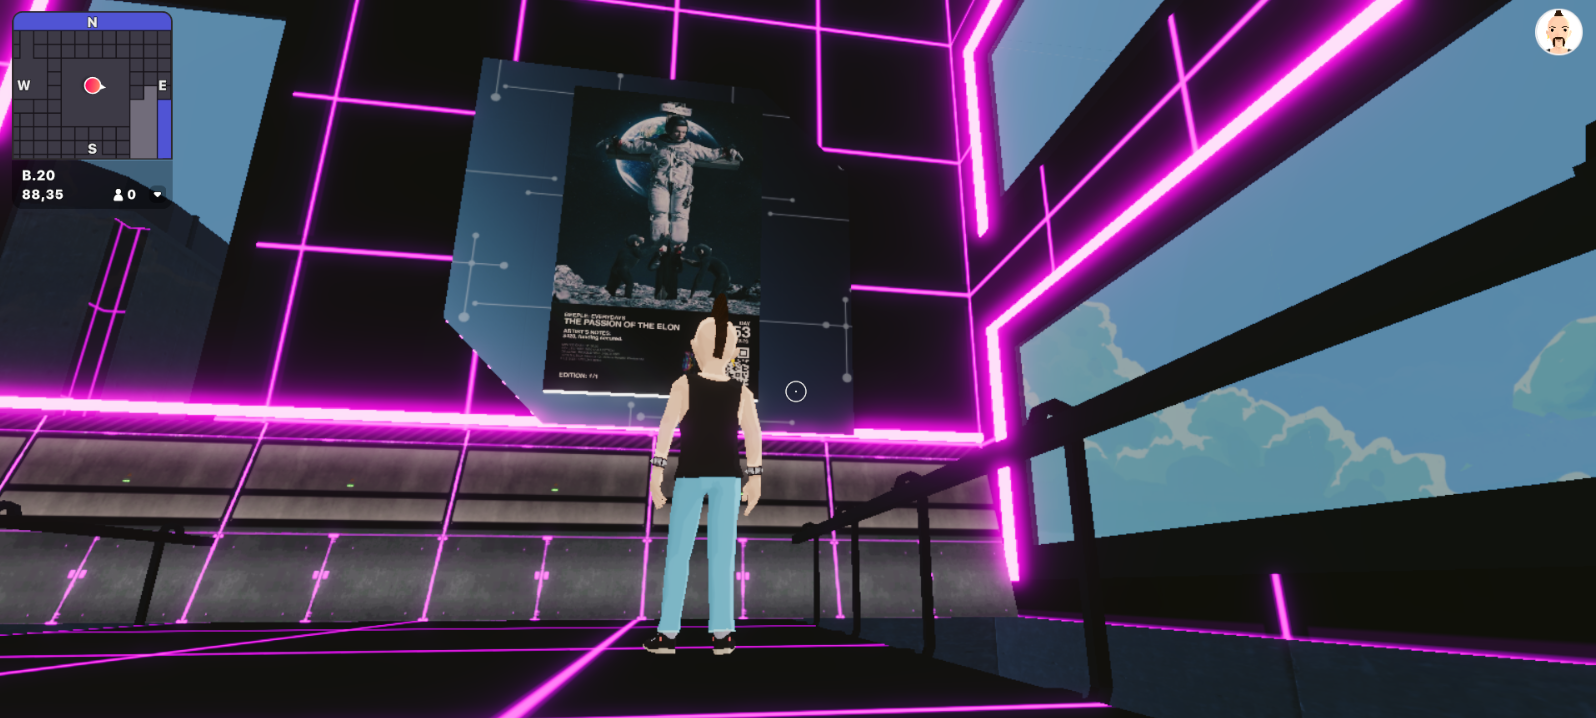 A digital rendering showing a man in a mohawk looking up at a big Beeple poster on a black wall lit with pink fluorescent tubing